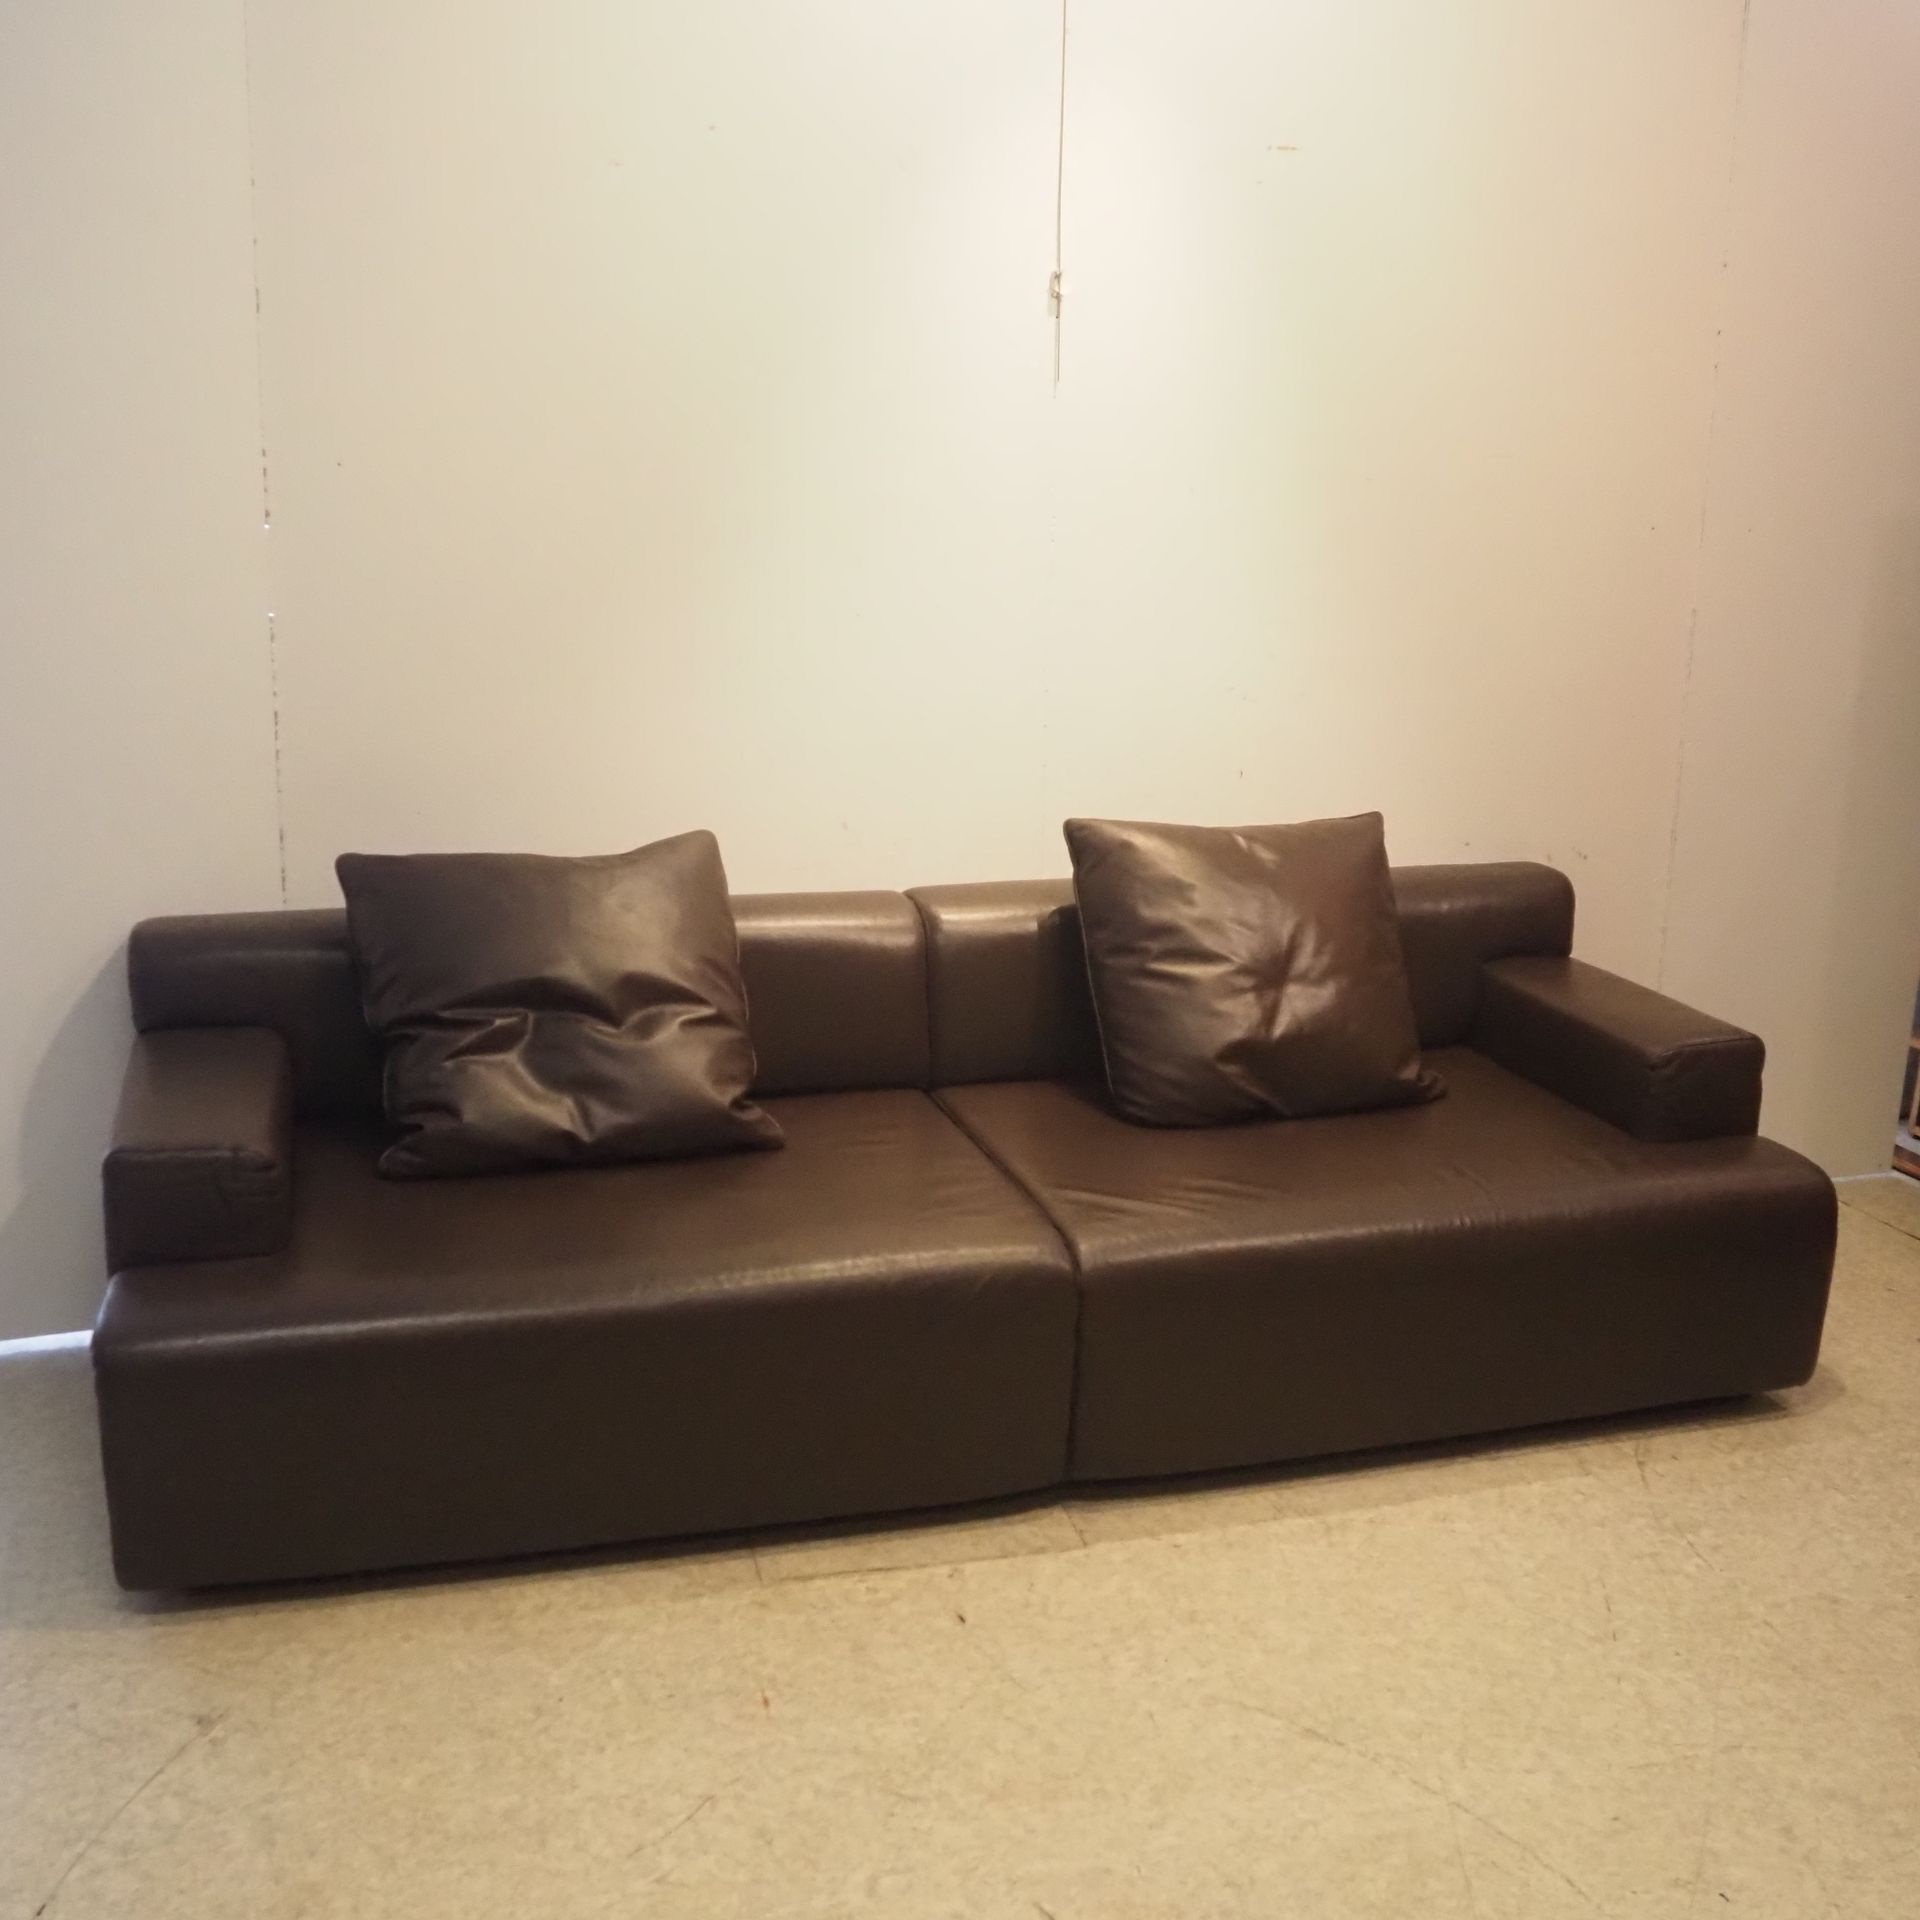 Null Leroy William: Modern 3 seater sofa circa 2000, wooden frame upholstered wi&hellip;